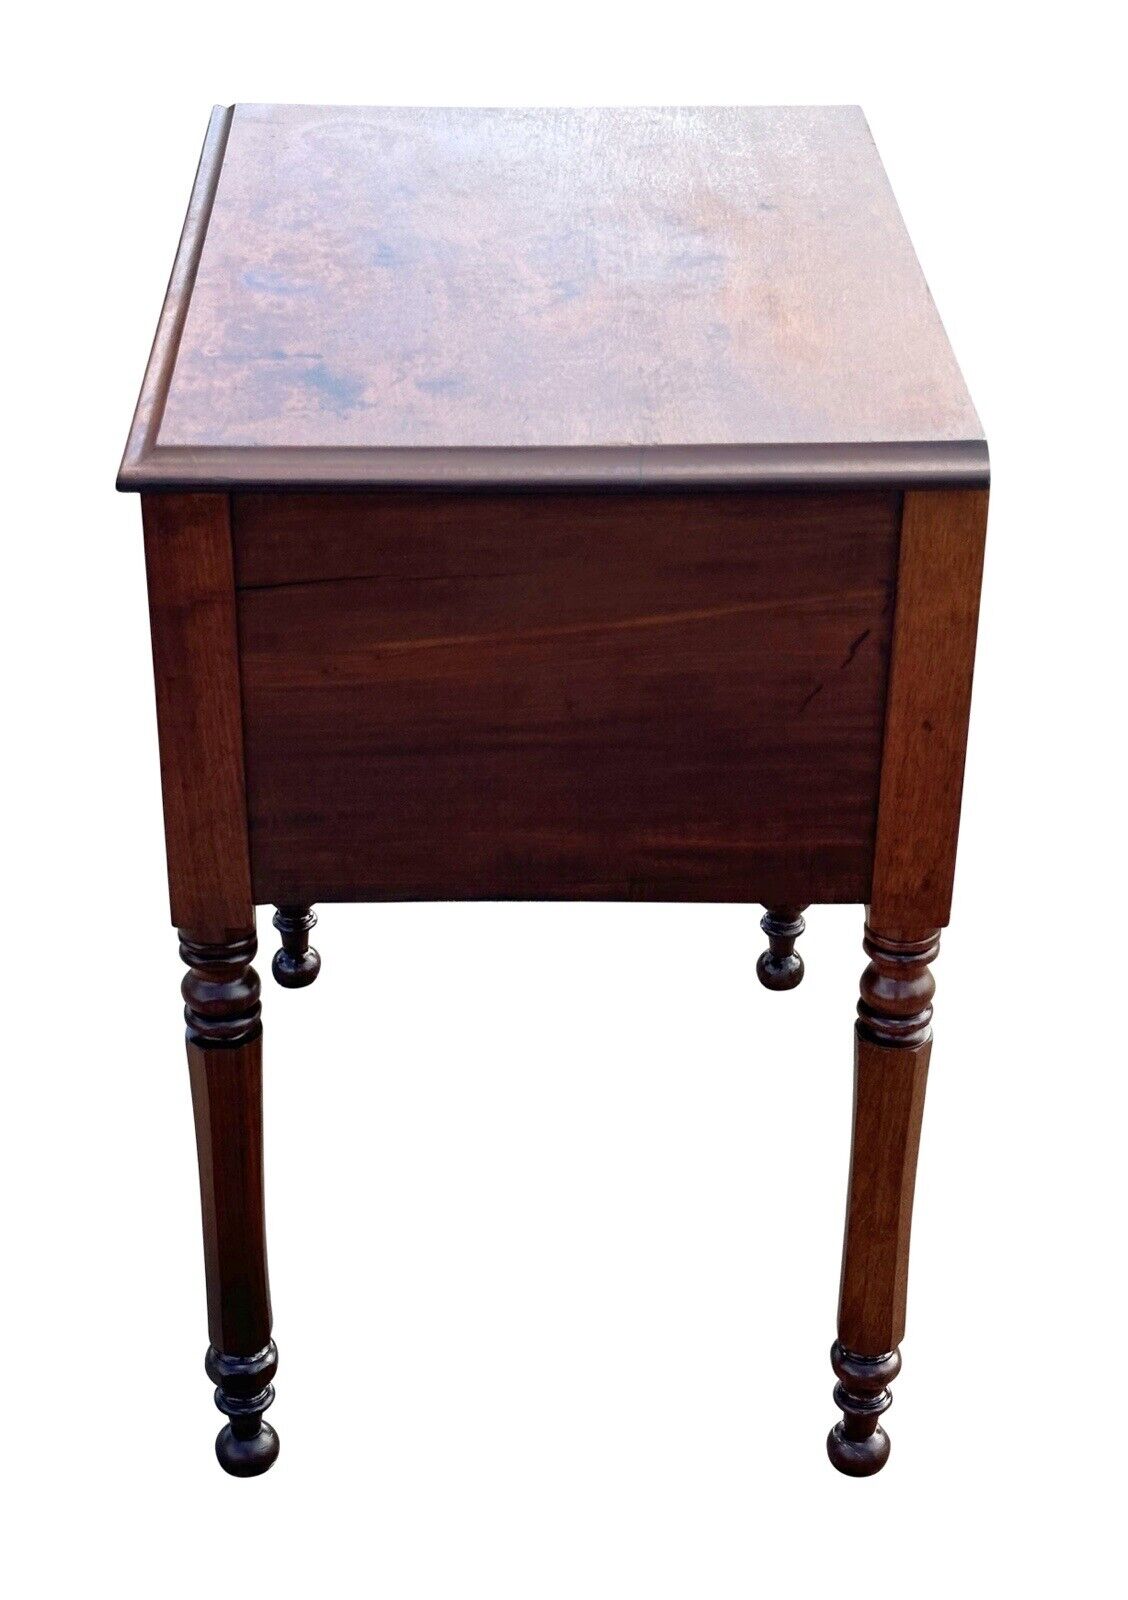 19th Century Antique Sheraton Mahogany Worktable / Stand With Octagonal Legs